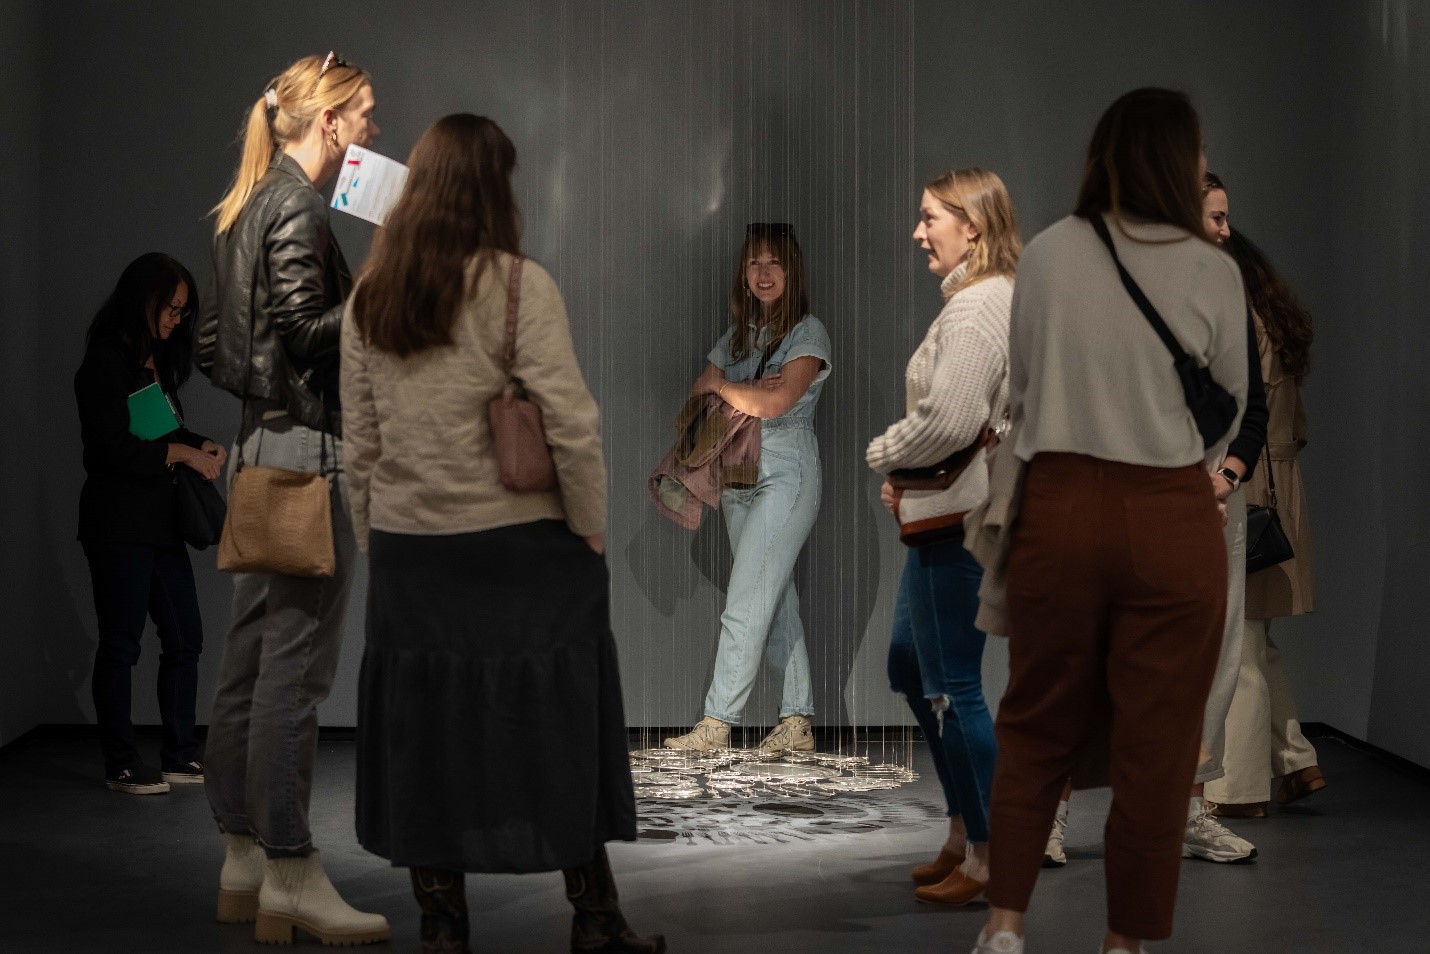 In a dim-lit museum gallery many women walk around a sculpture of flattened silverware that hangs from the ceiling, hovering just above the gallery floor.